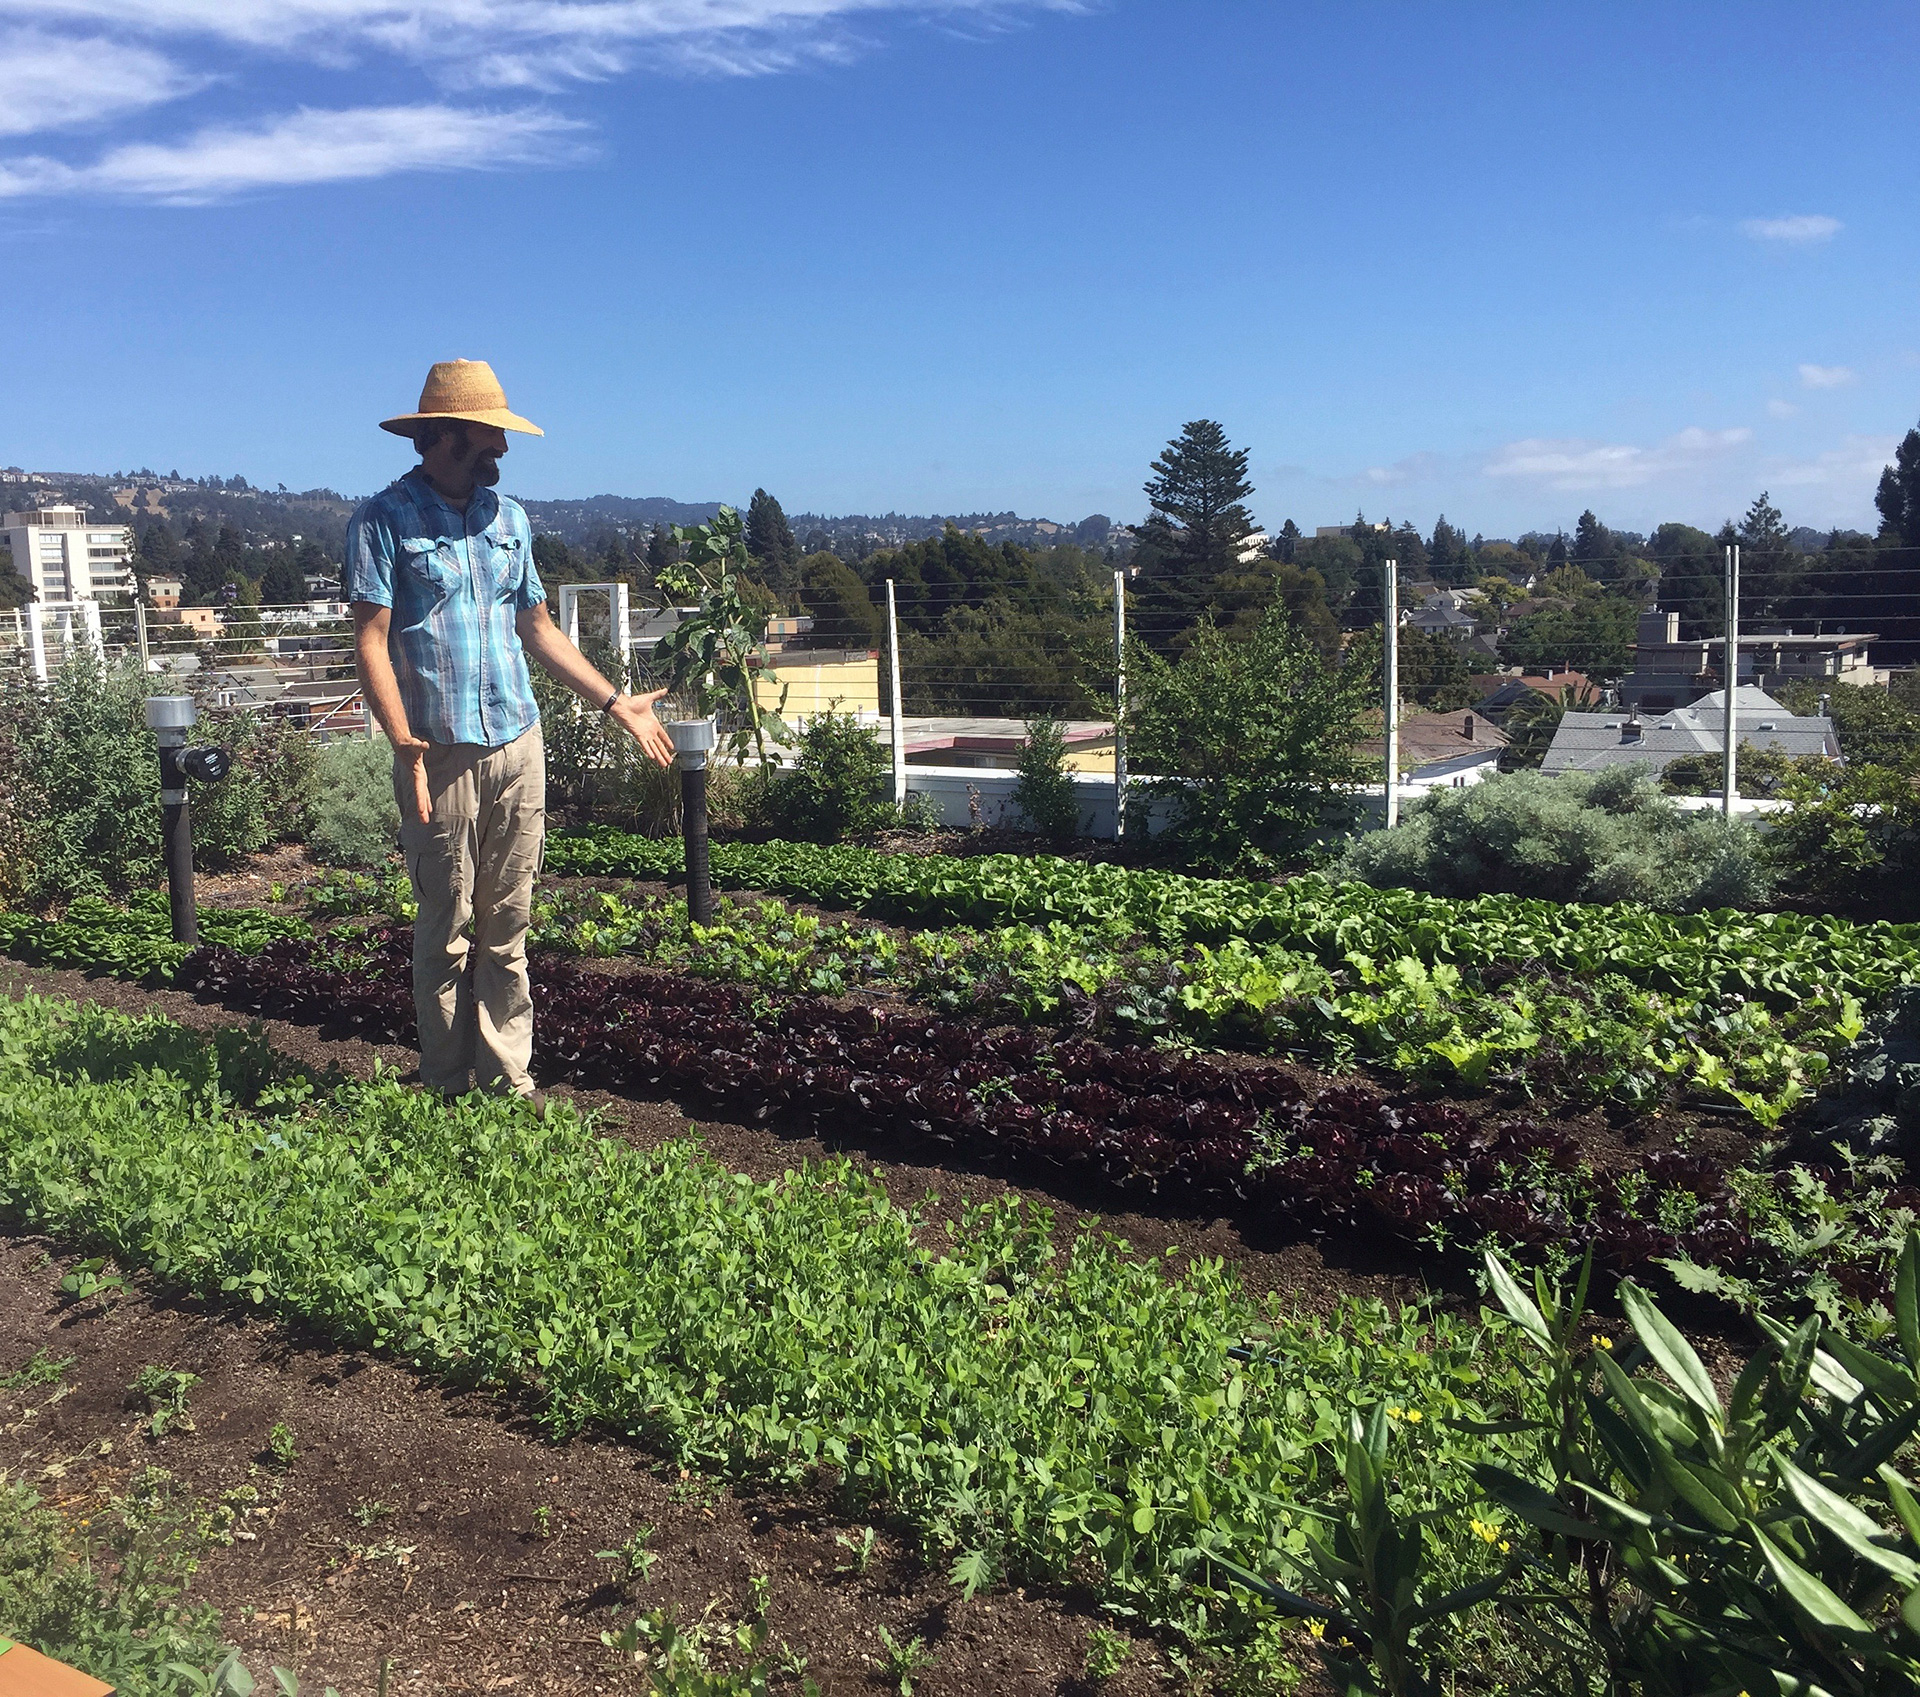 Top Leaf Farm's founder, ecological designer and organic farmer Benjamin Fahrer, introduces some of his bounty. His hyper-local rooftop farm, delivers to customers within a 3 mile radius, including Pizzaiolo, Gather and Chez Panisse.